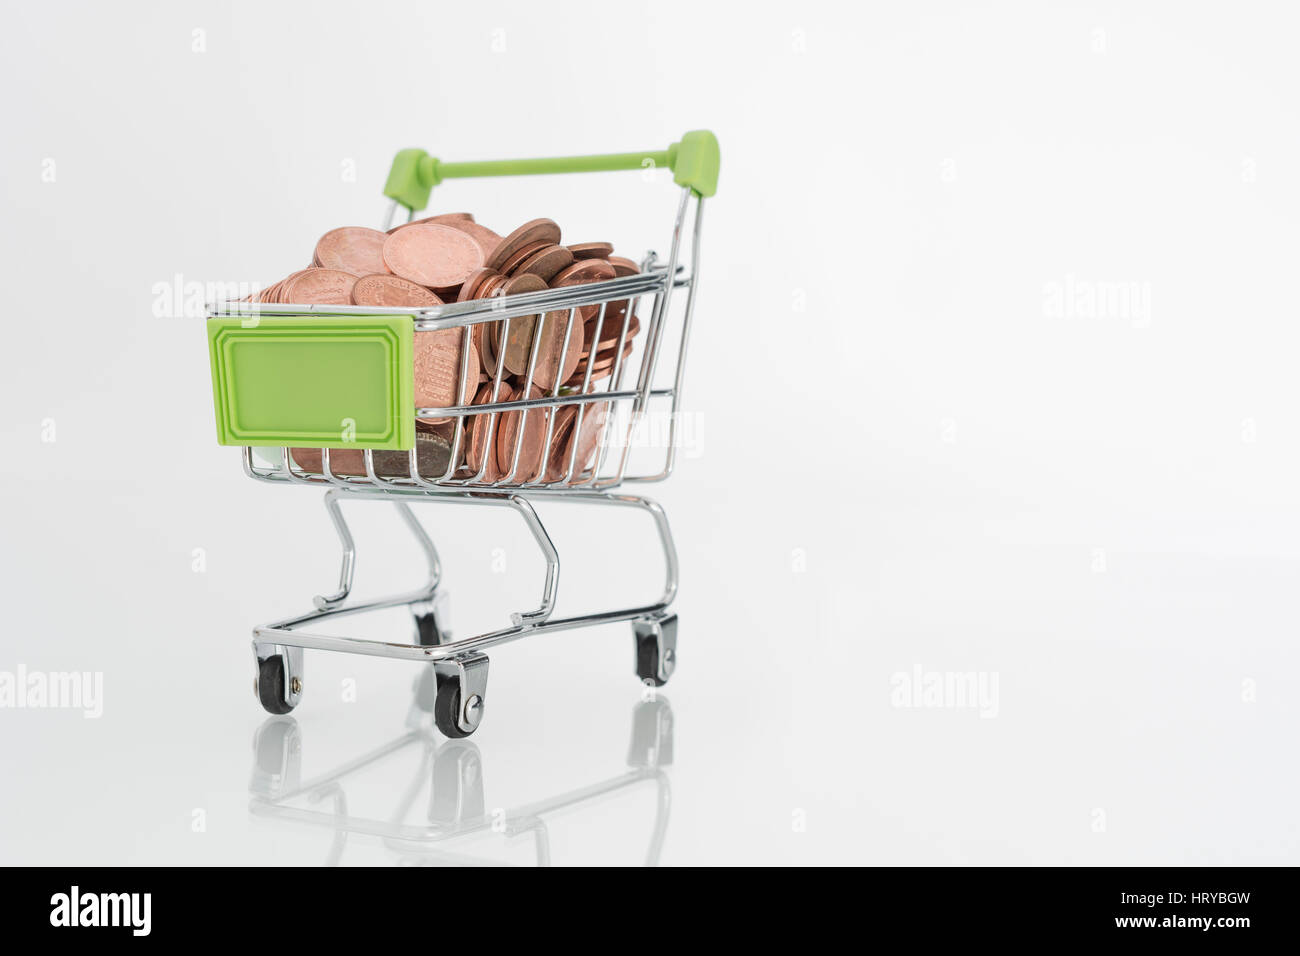 Penny / 1p coins in shopping trolley. Representing UK consumer spending power and high street sales, pennies. Stock Photo